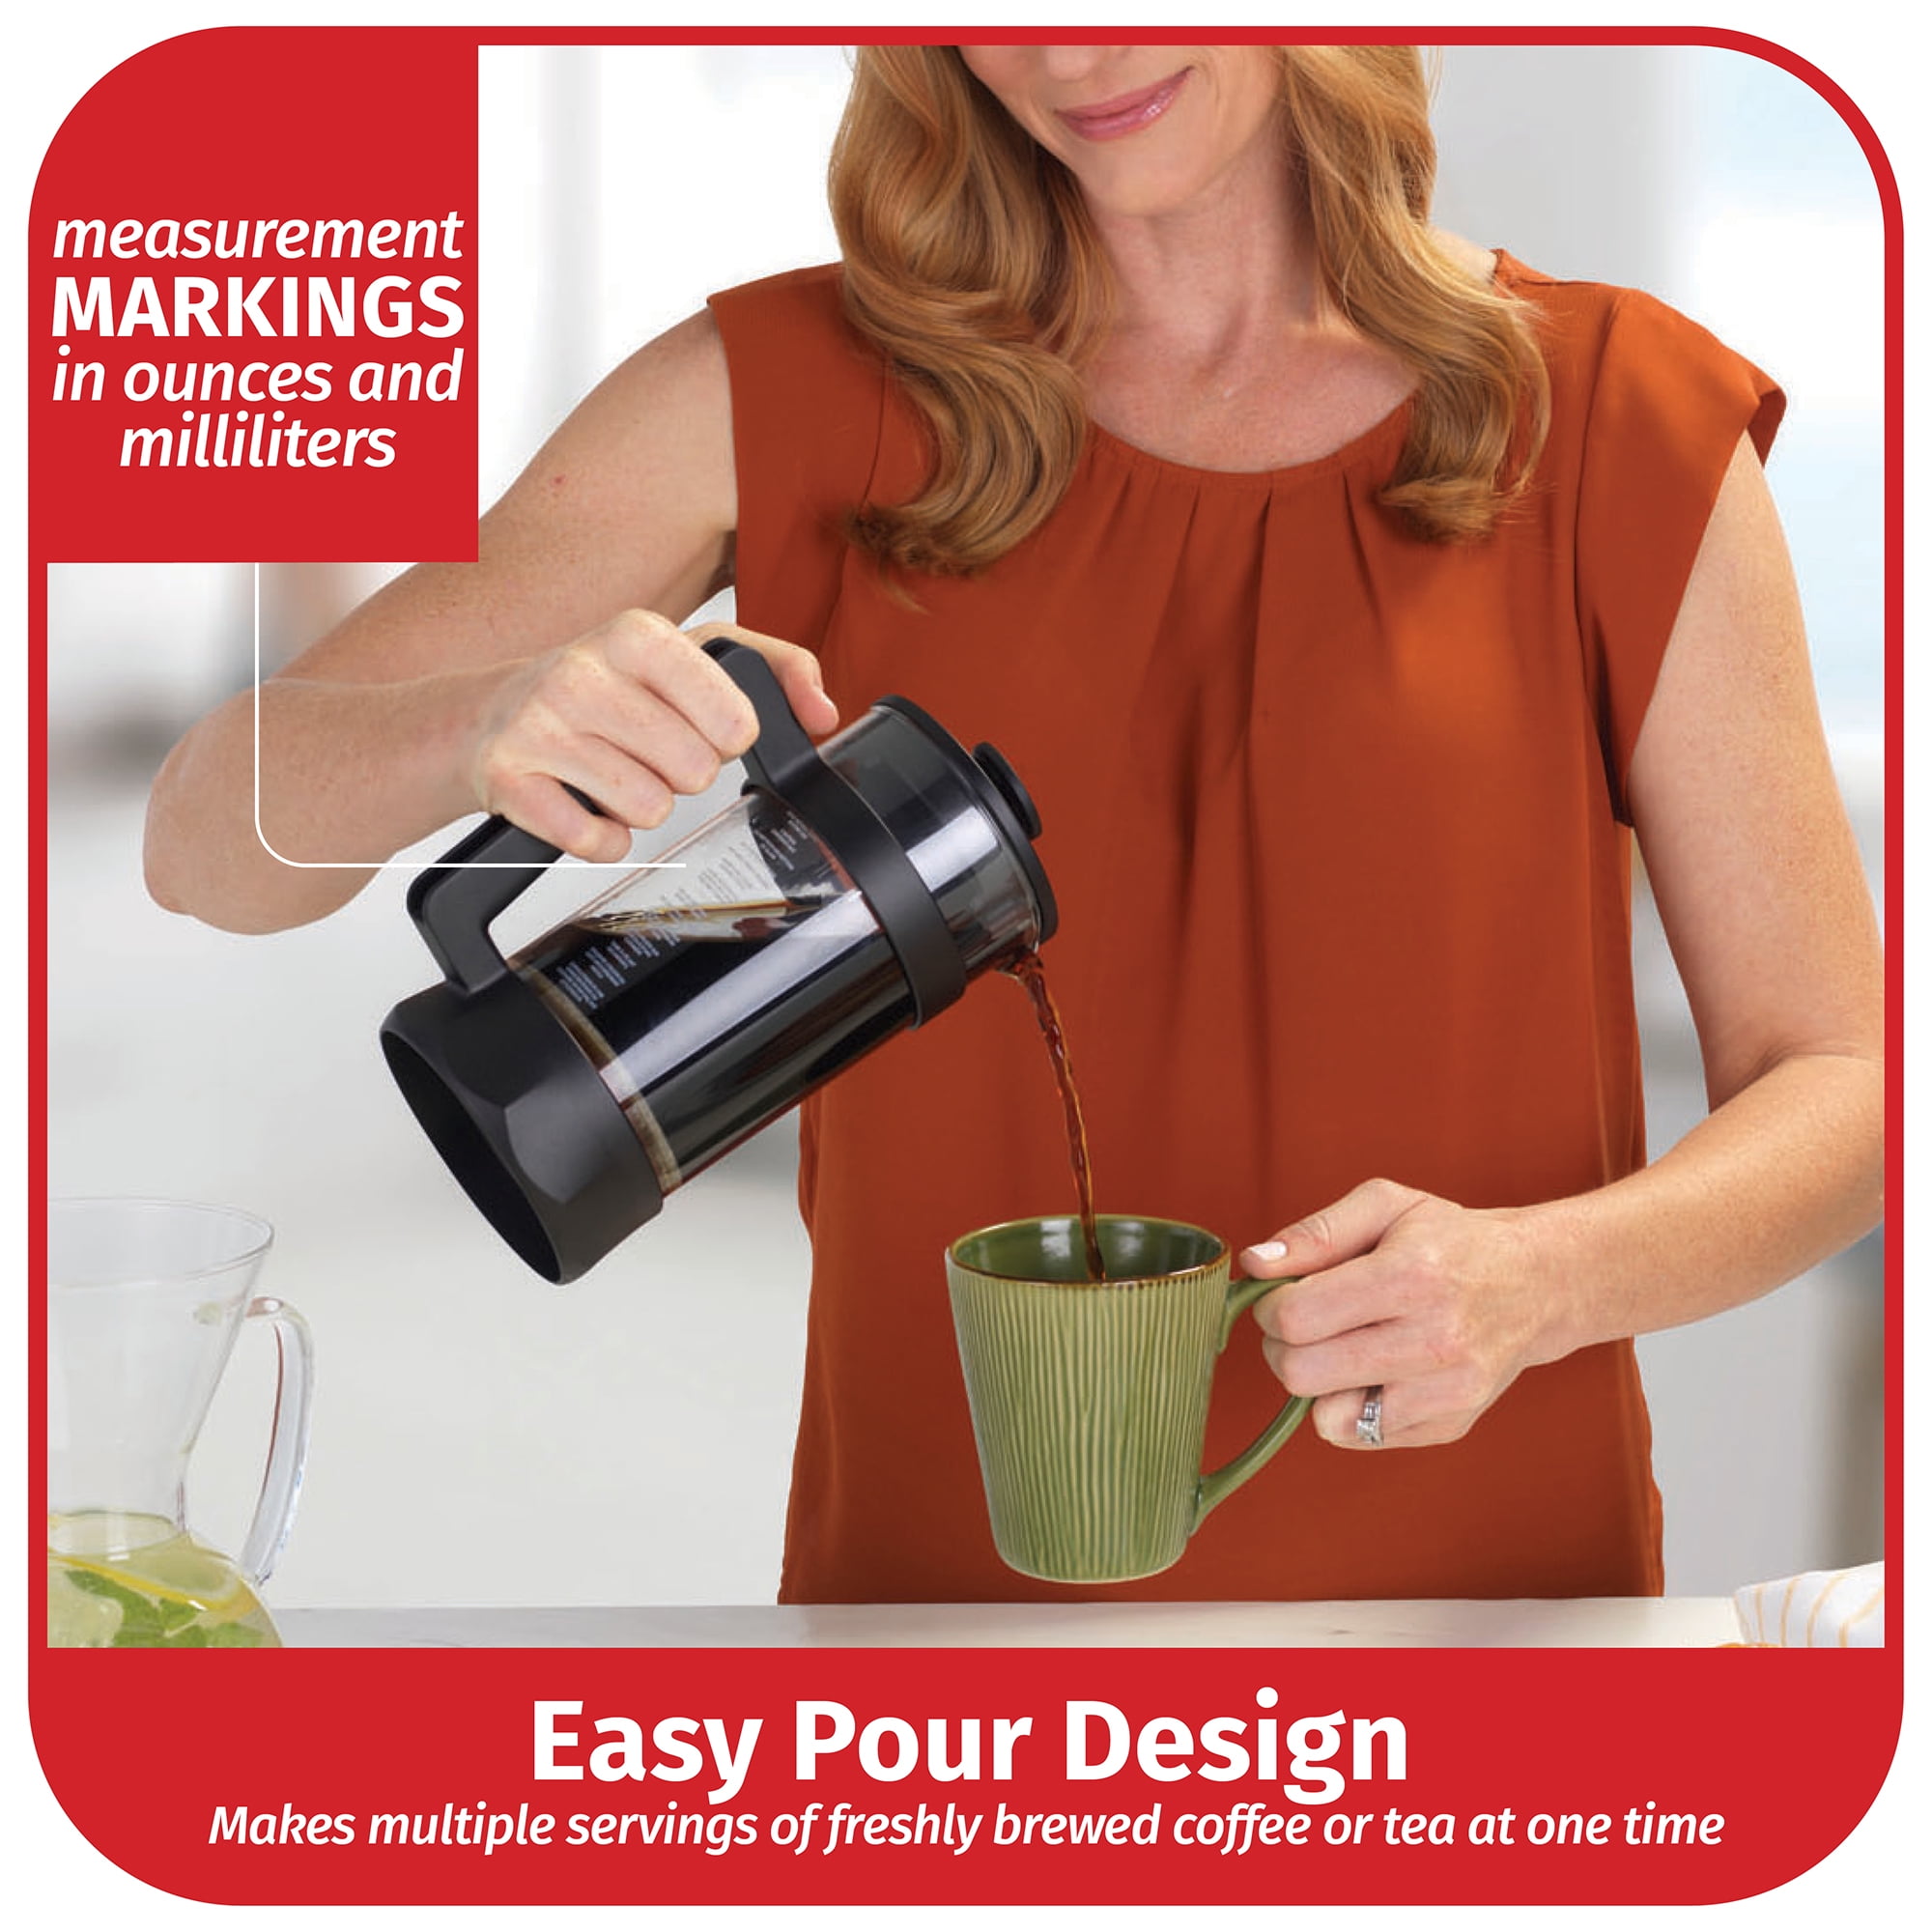 Cook Pro 680 3-Cup Coffee Plunger